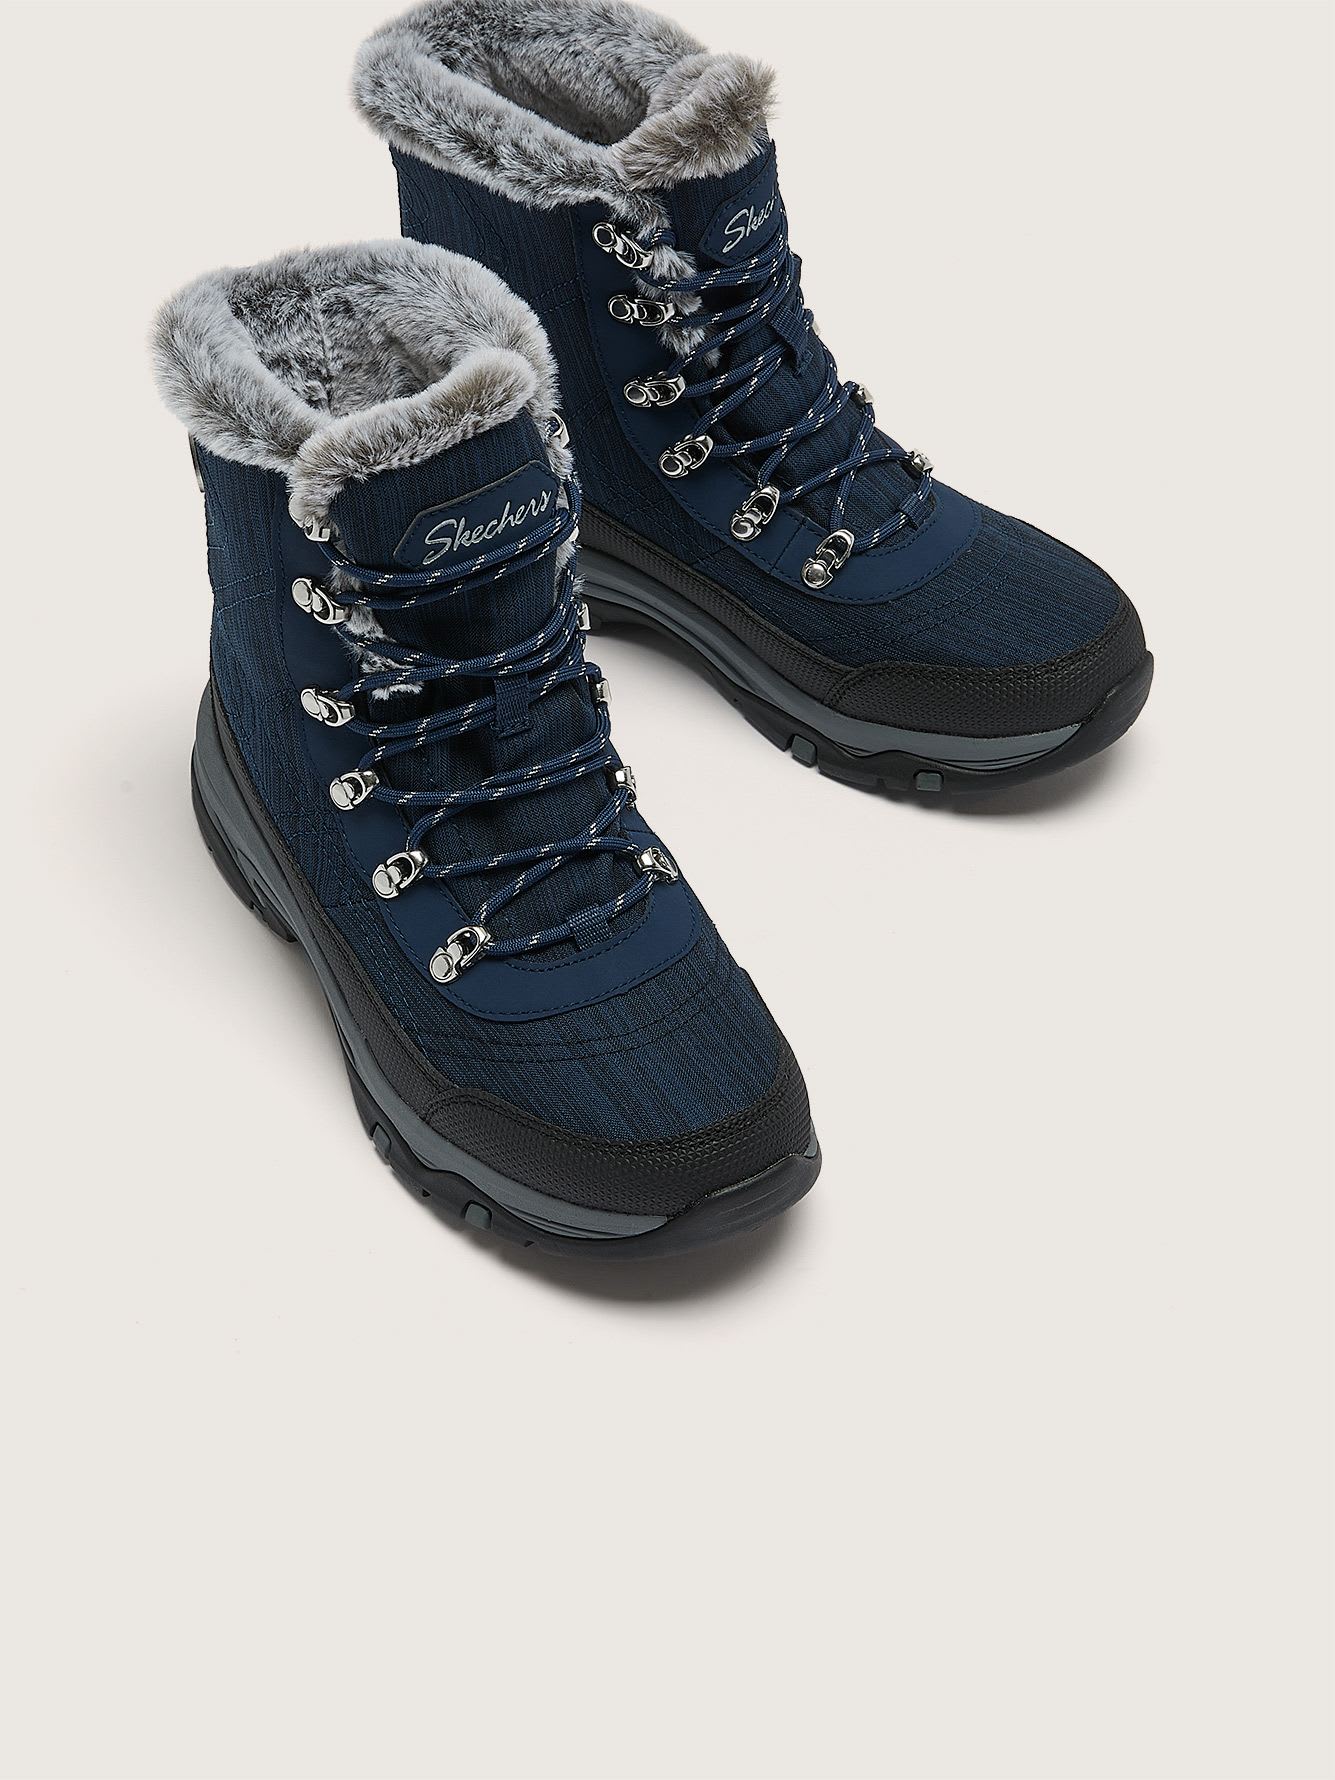 Bottes Trego Cold Blues, pied large - Skechers